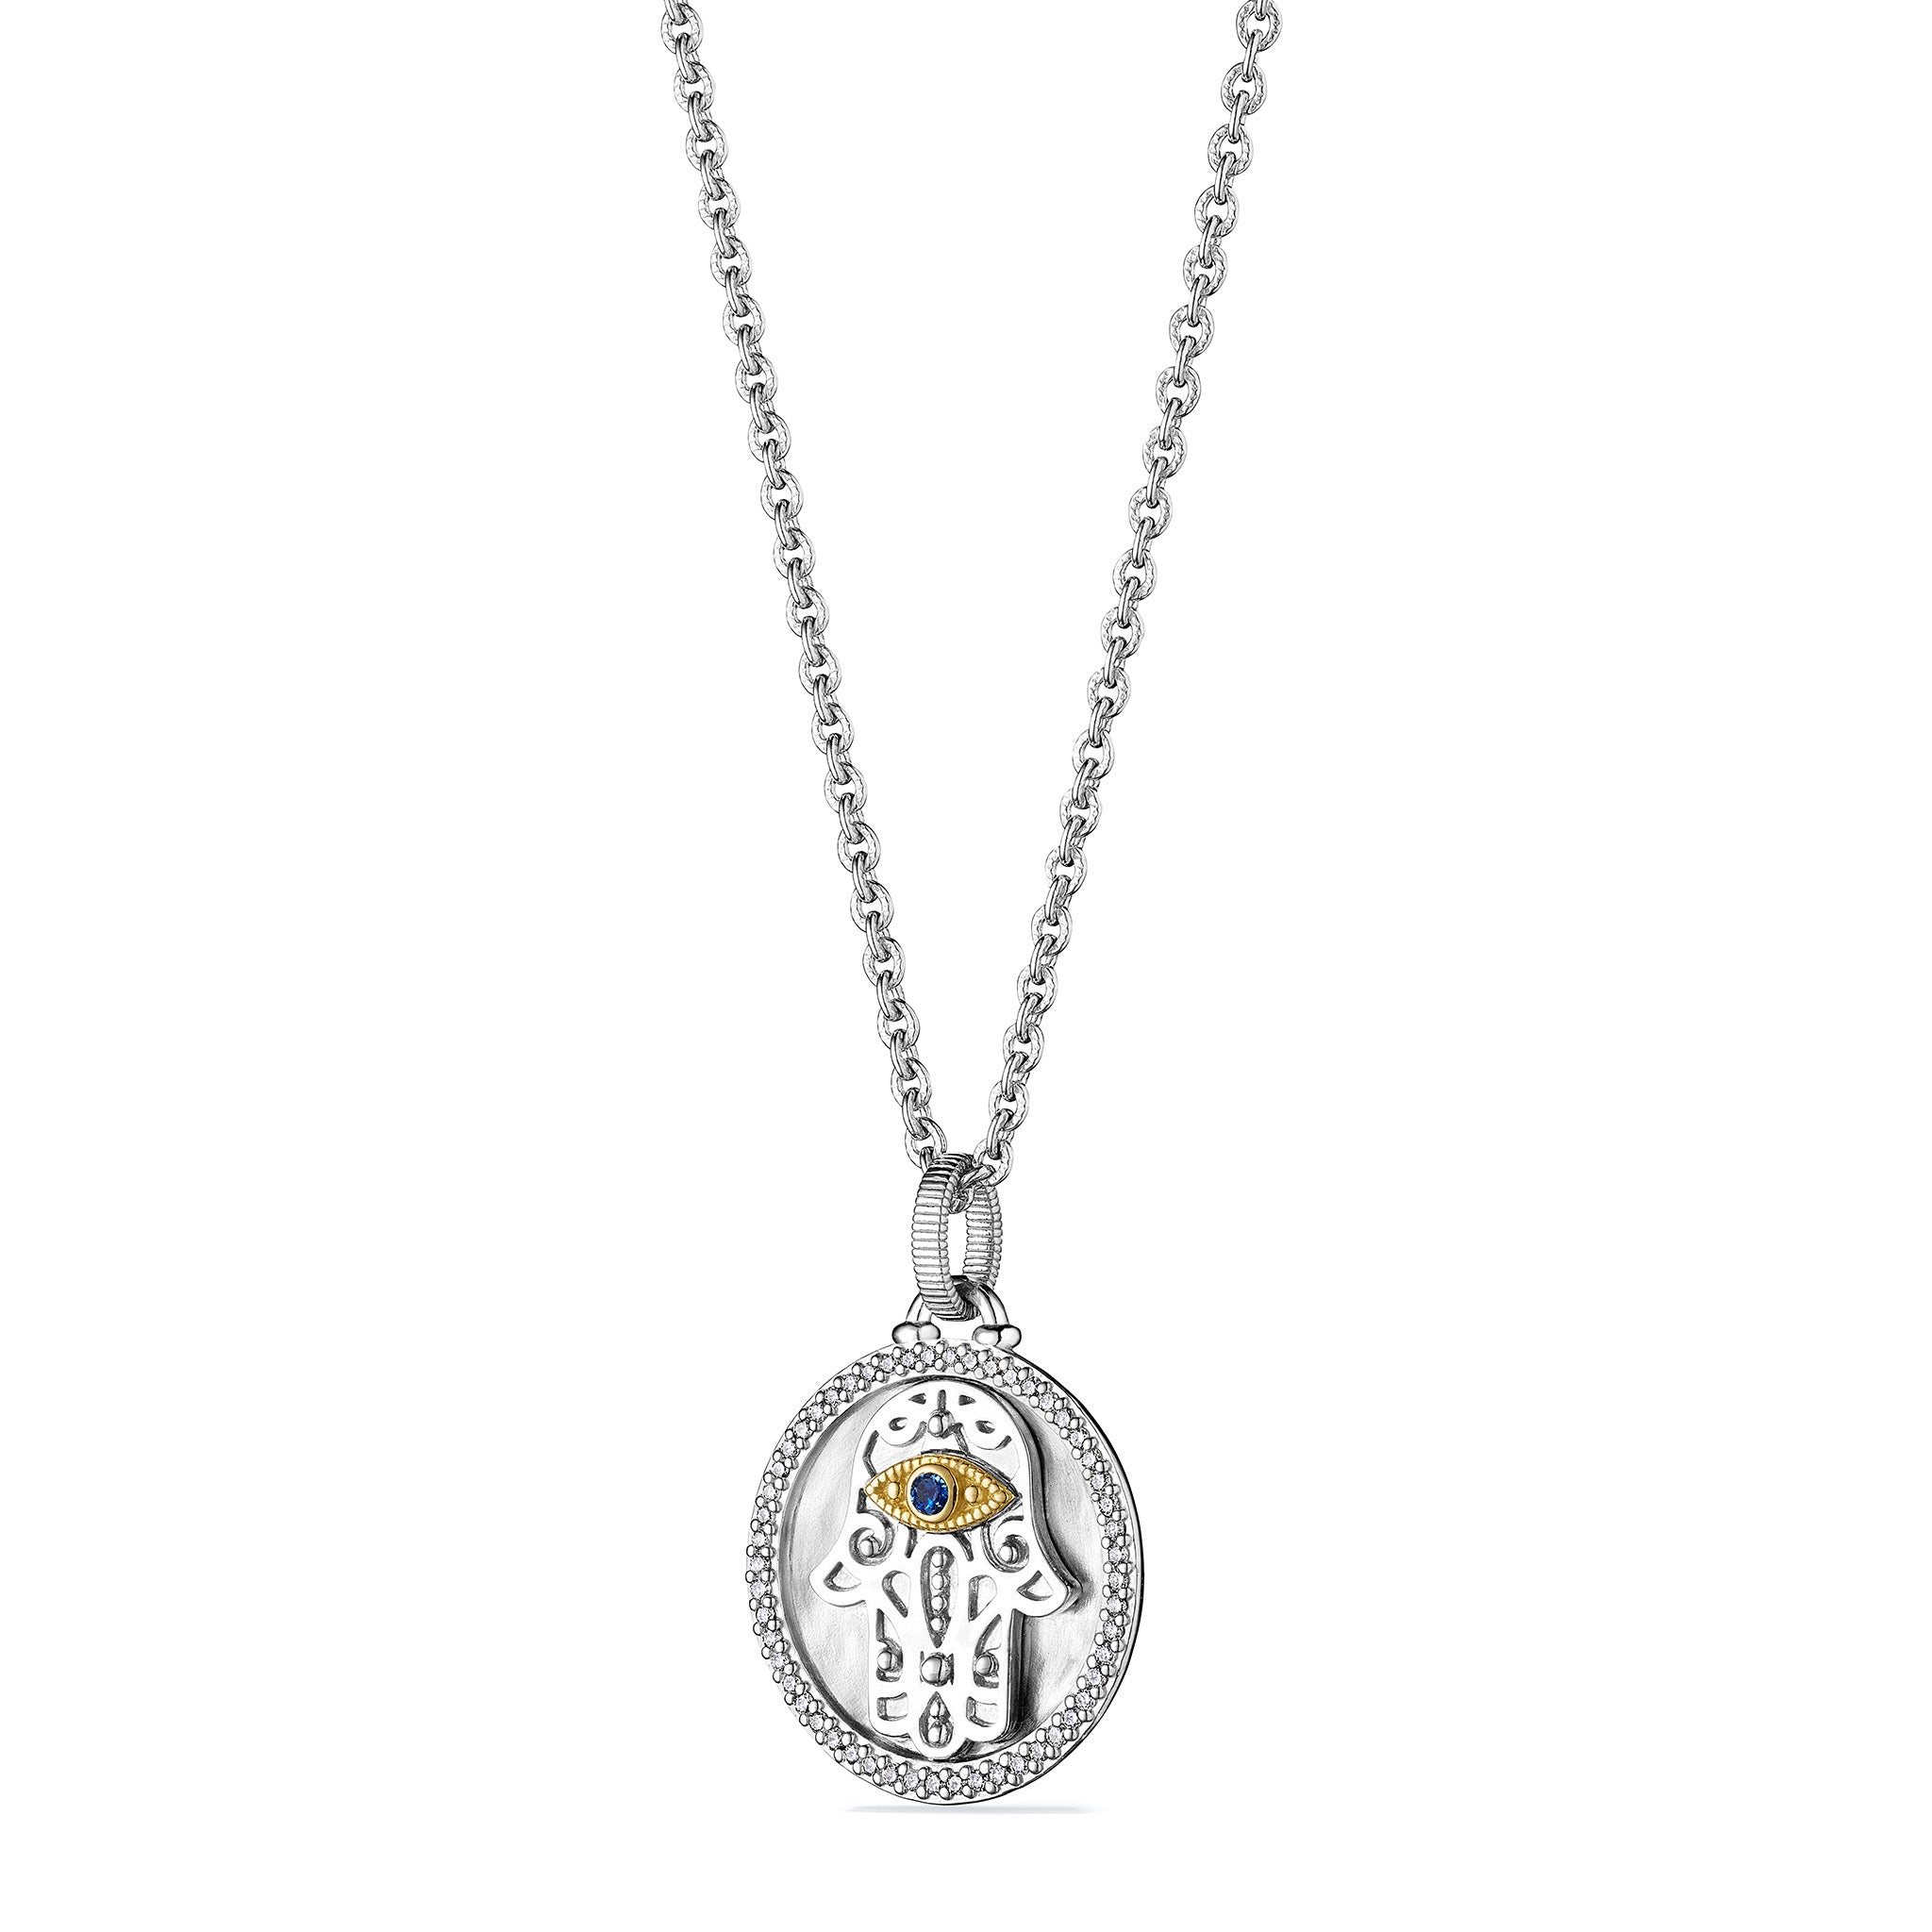 Little Luxuries Hamsa Medallion Necklace with Blue Sapphire, Diamonds and 18K Gold